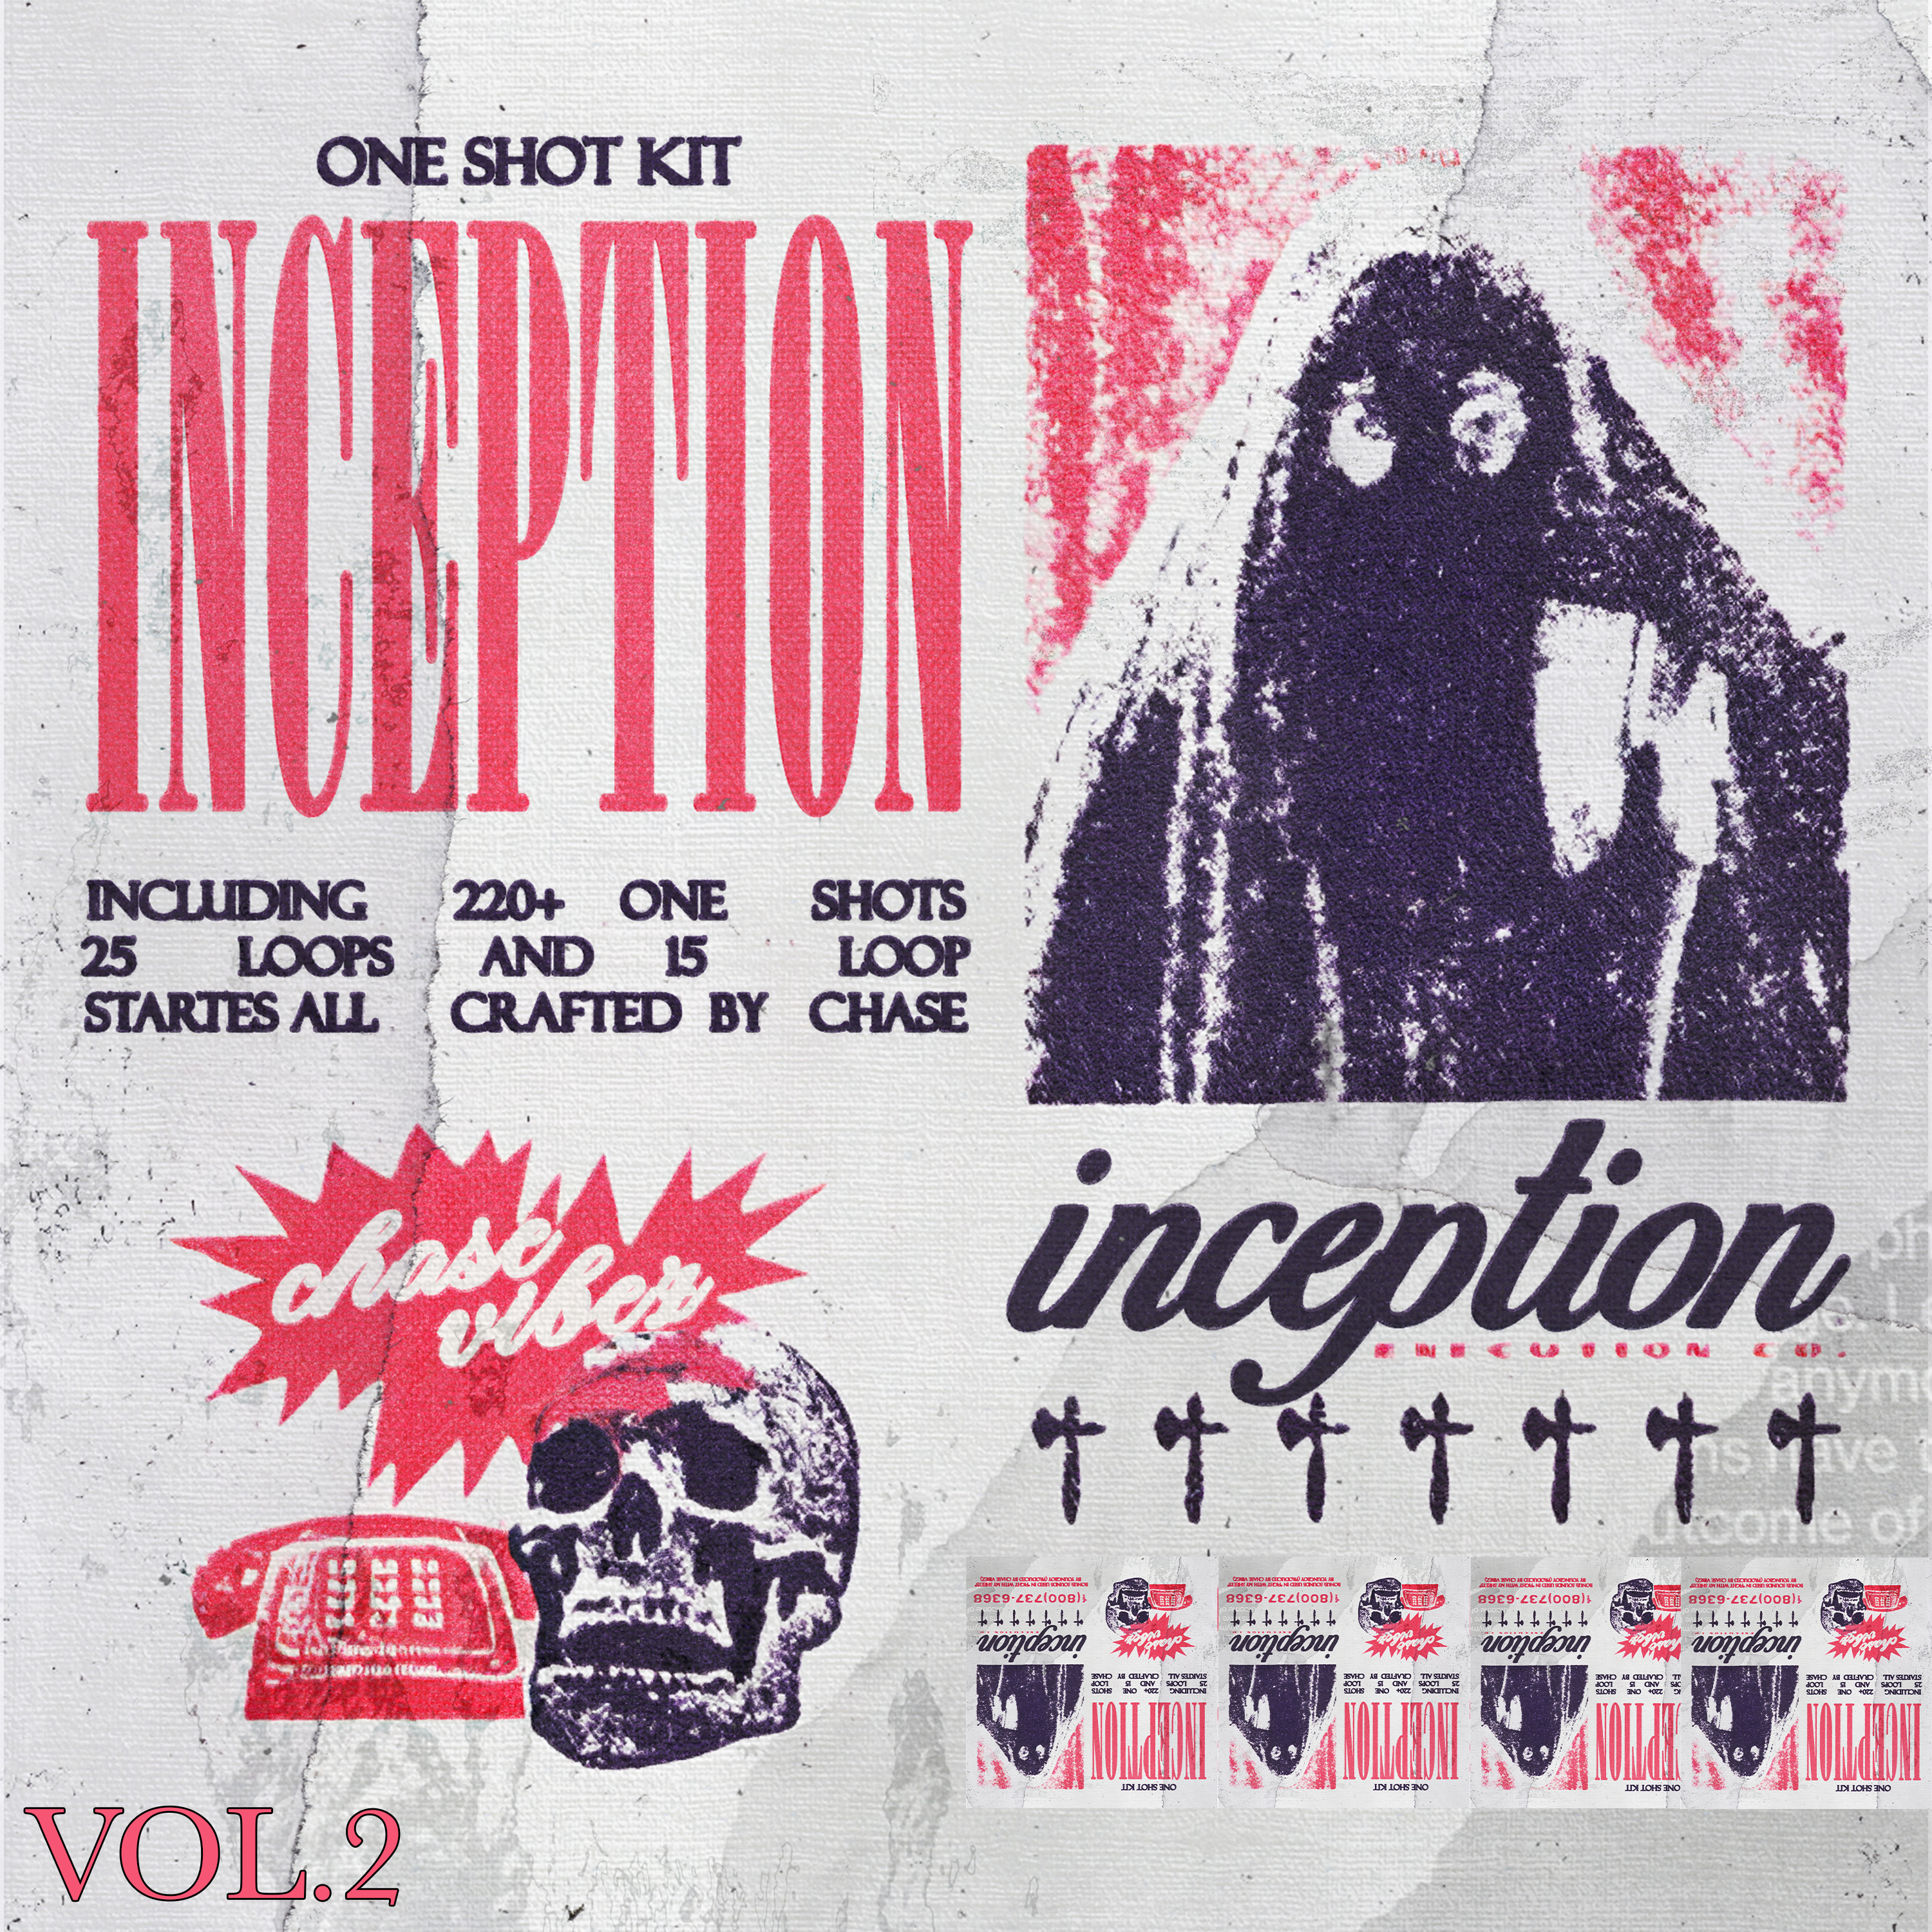 INCEPTION VOL.2 (One Shot Kit & Sample Library)